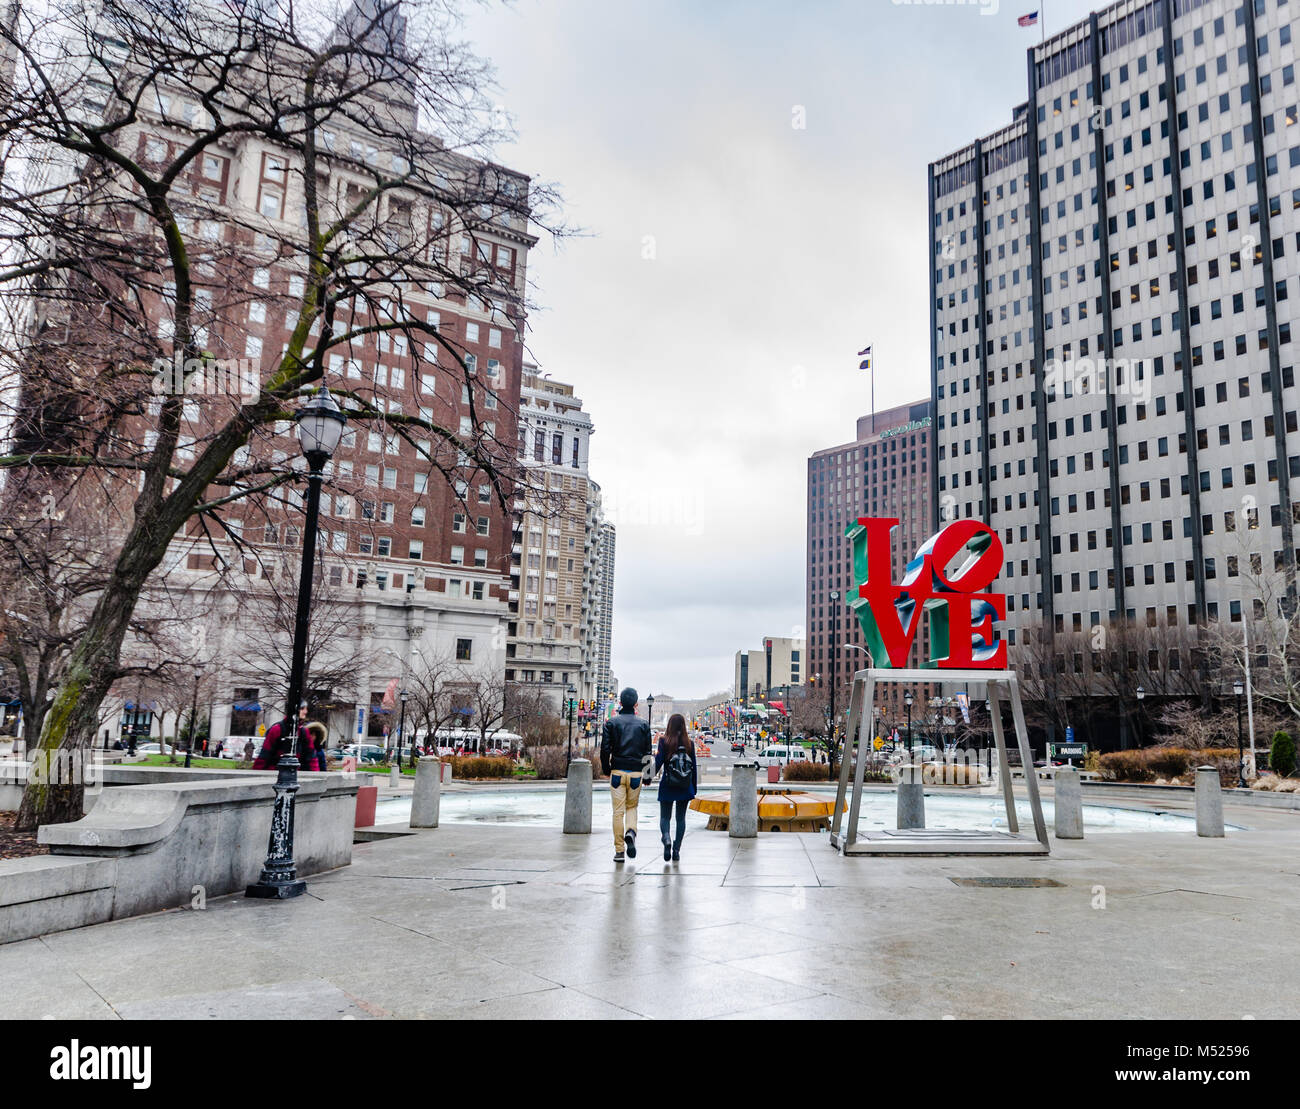 Love Park, officially known as John F. Kennedy Plaza, is a plaza located in Center City, Philadelphia, Pennsylvania. The park is nicknamed Love Park f Stock Photo